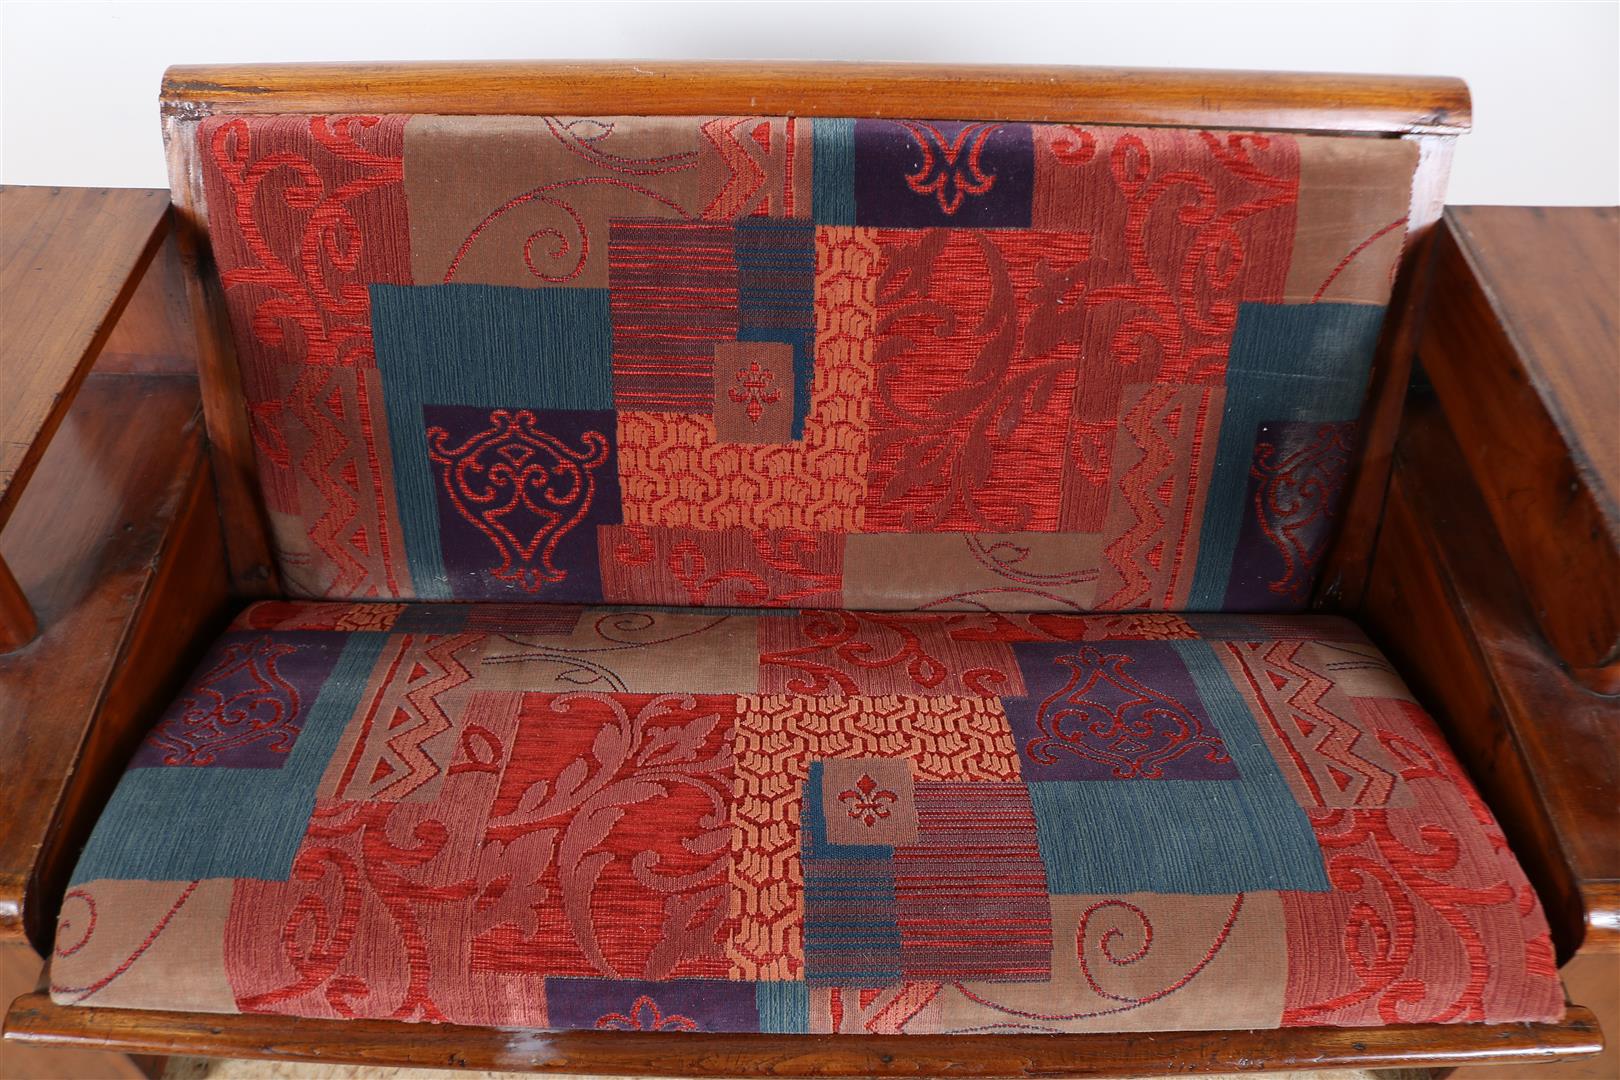 Teak Art Deco sofa with bookcases and drawer in armrest with colored velvet upholstery, Indonesia - Image 2 of 4